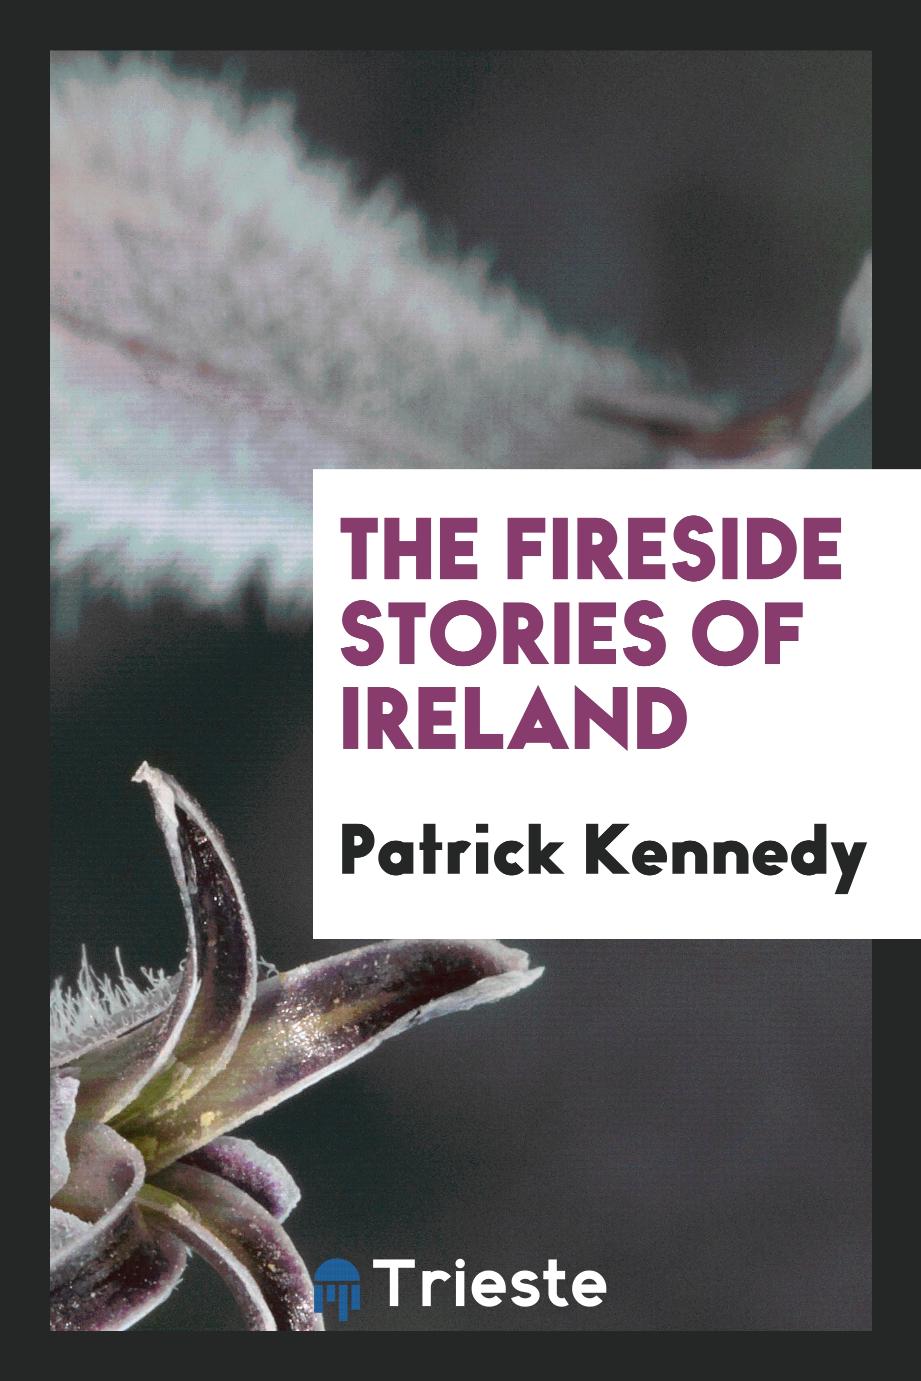 The fireside stories of Ireland